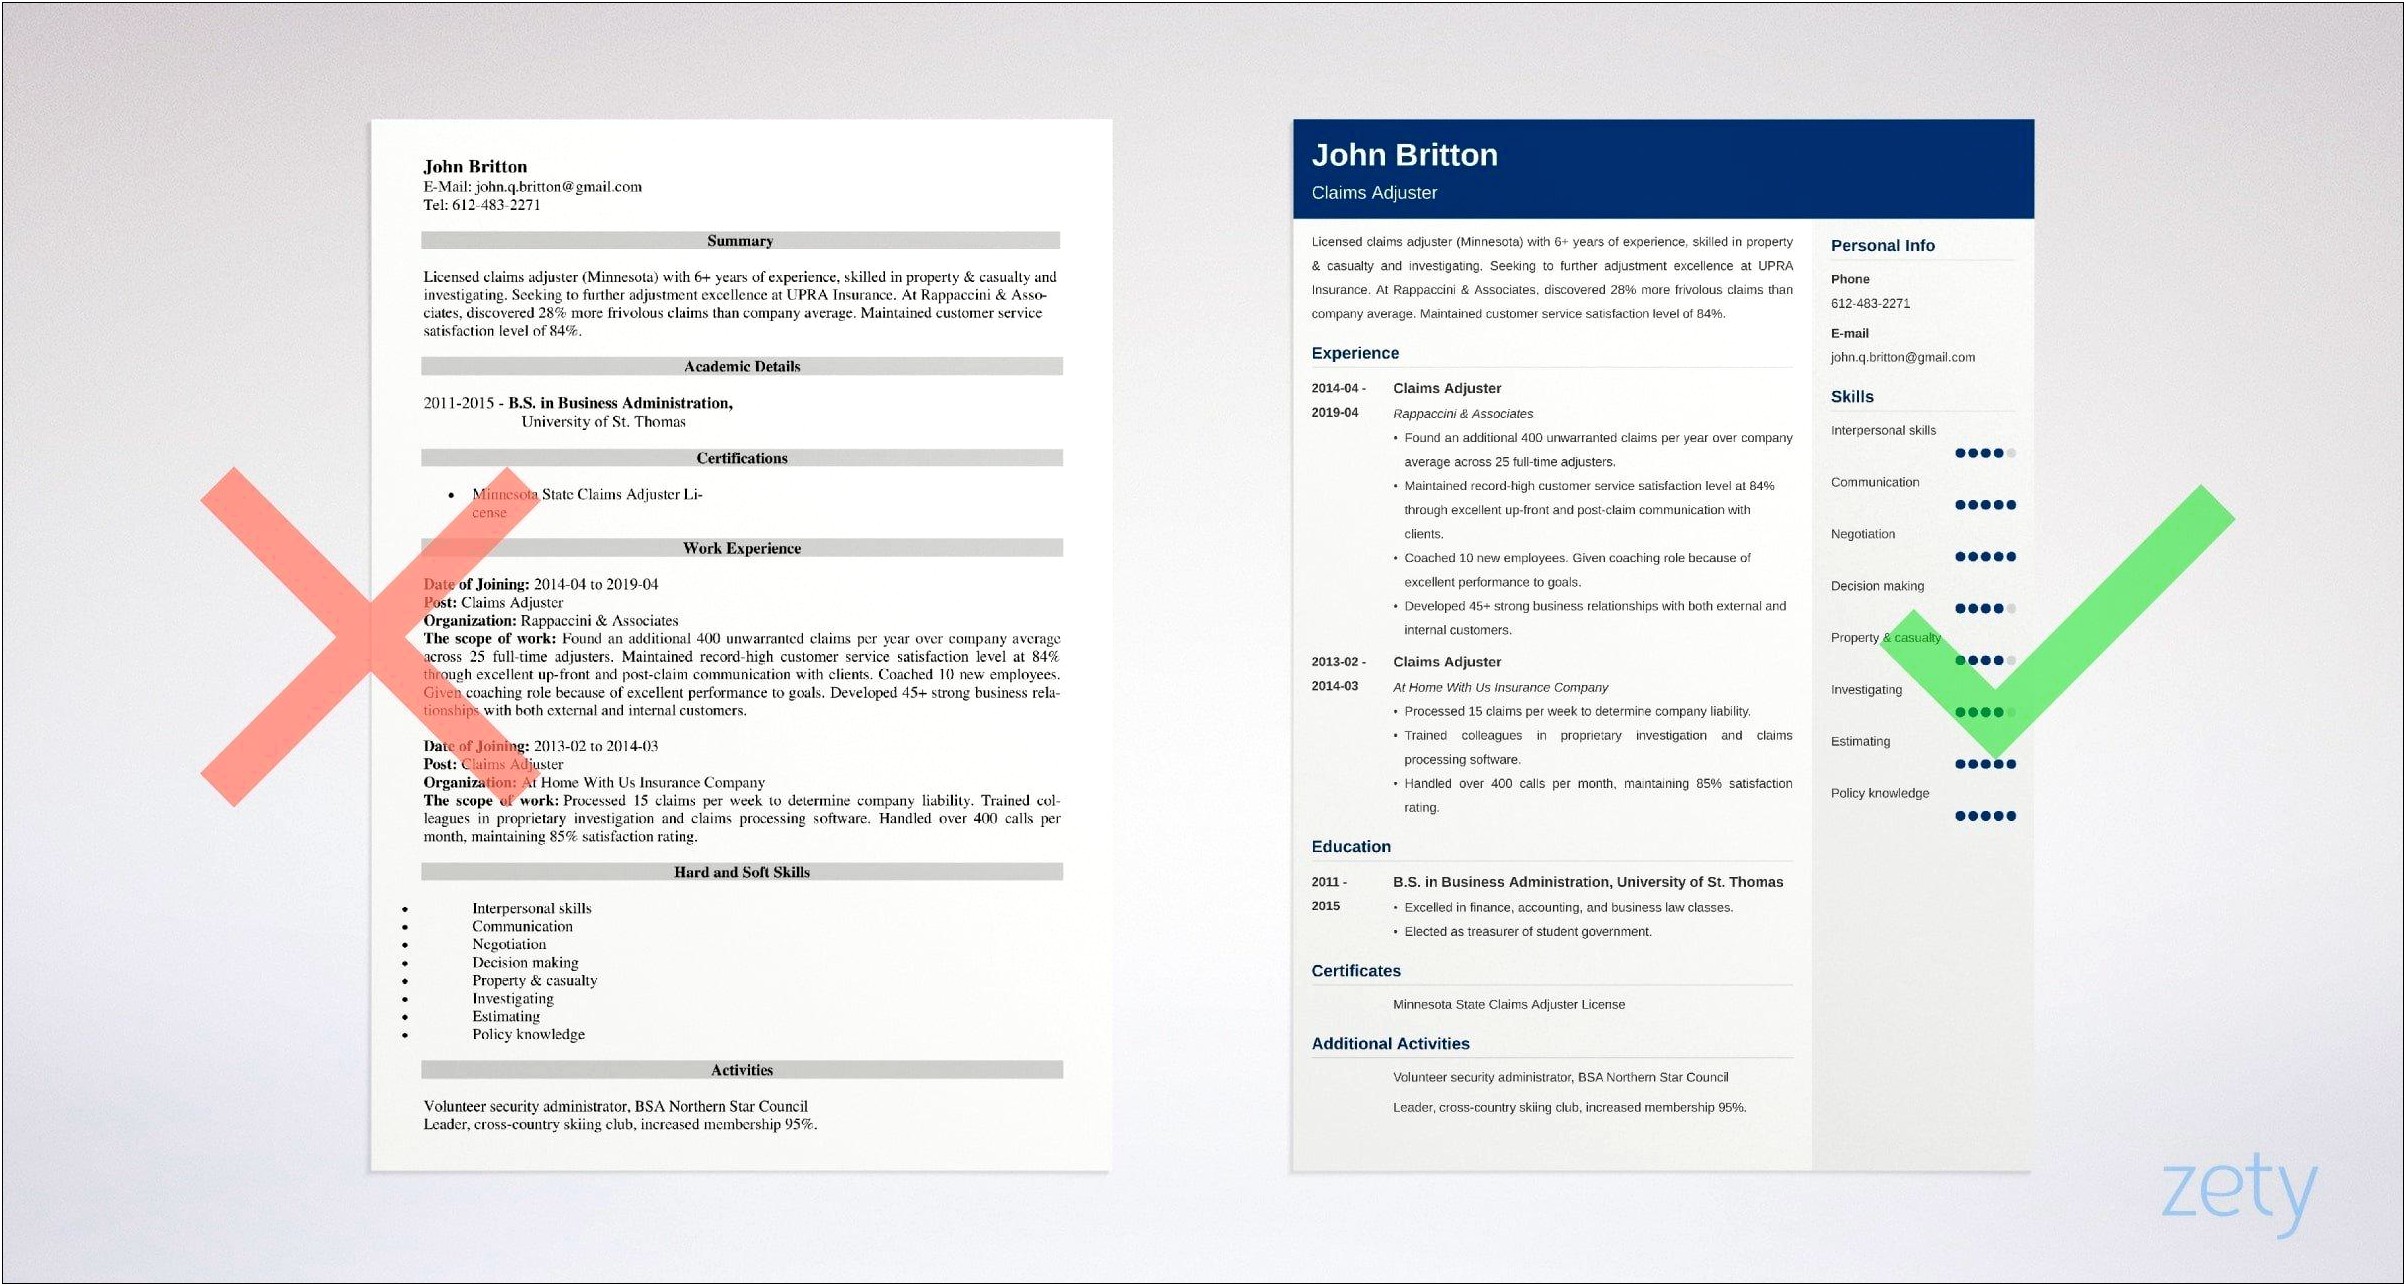 New Insurance Claims Adjuster Resume Examples